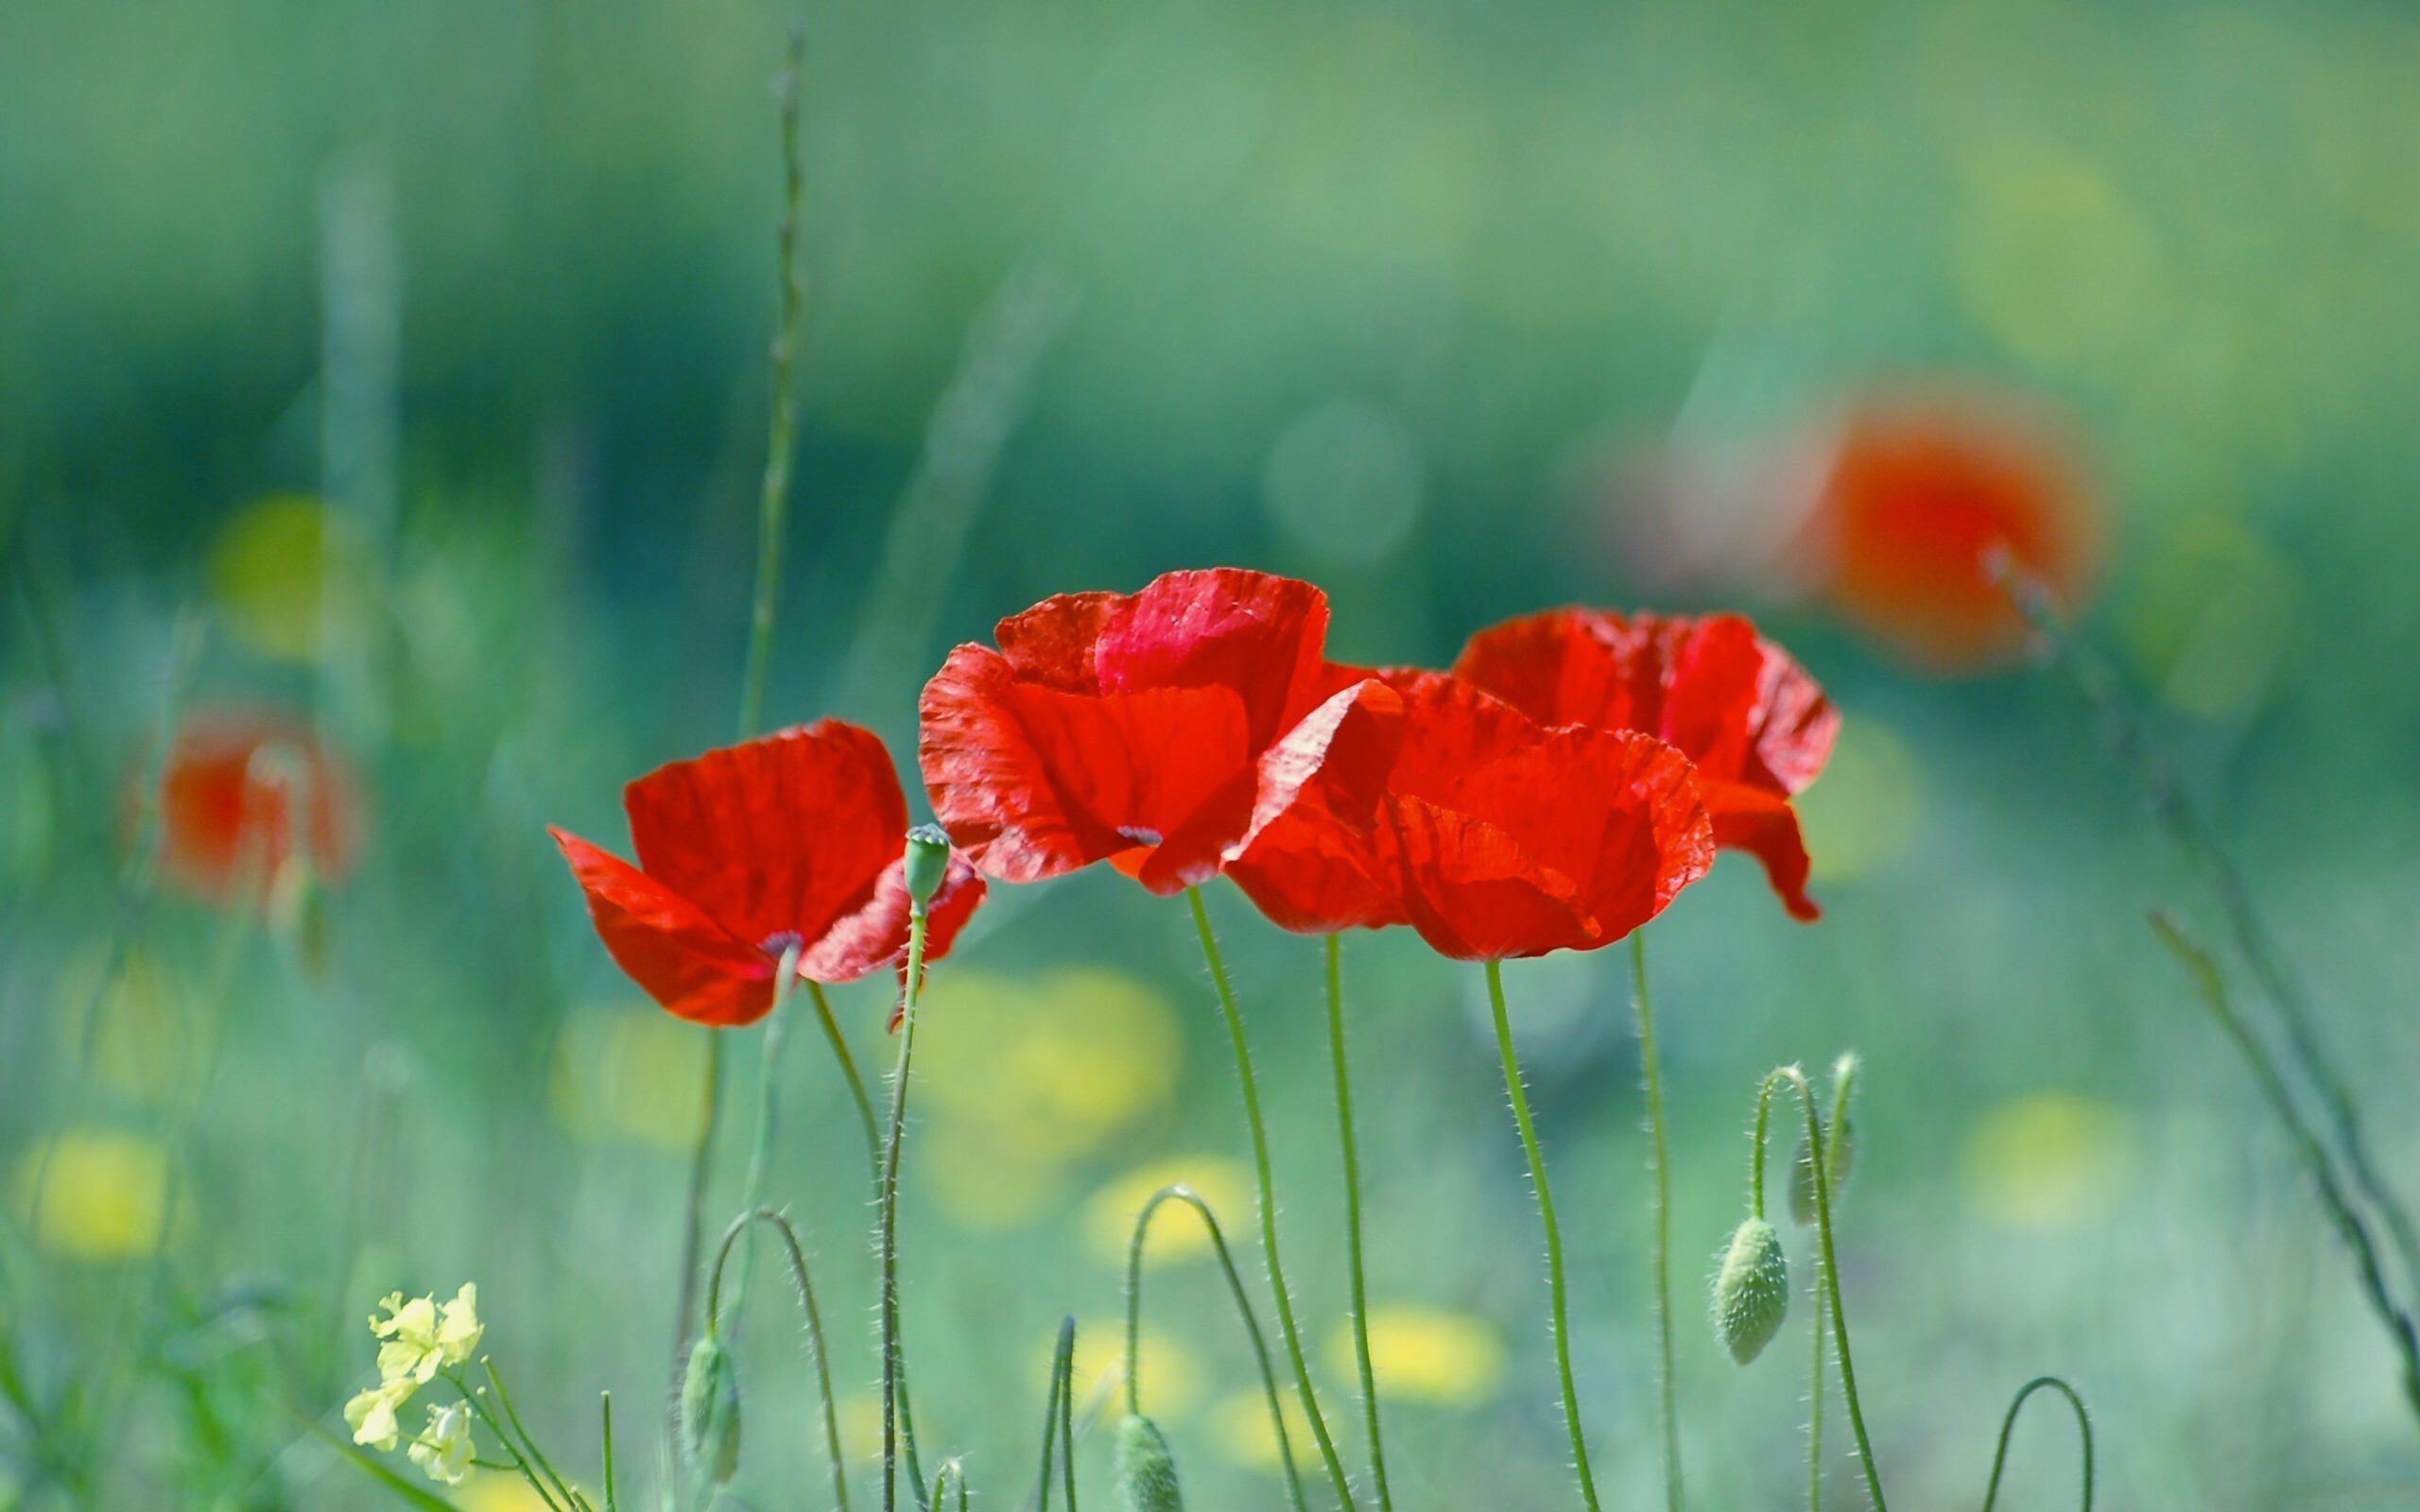 Poppy Flower: The buds are often nodding and are borne on solitary stalks. 2560x1600 HD Wallpaper.